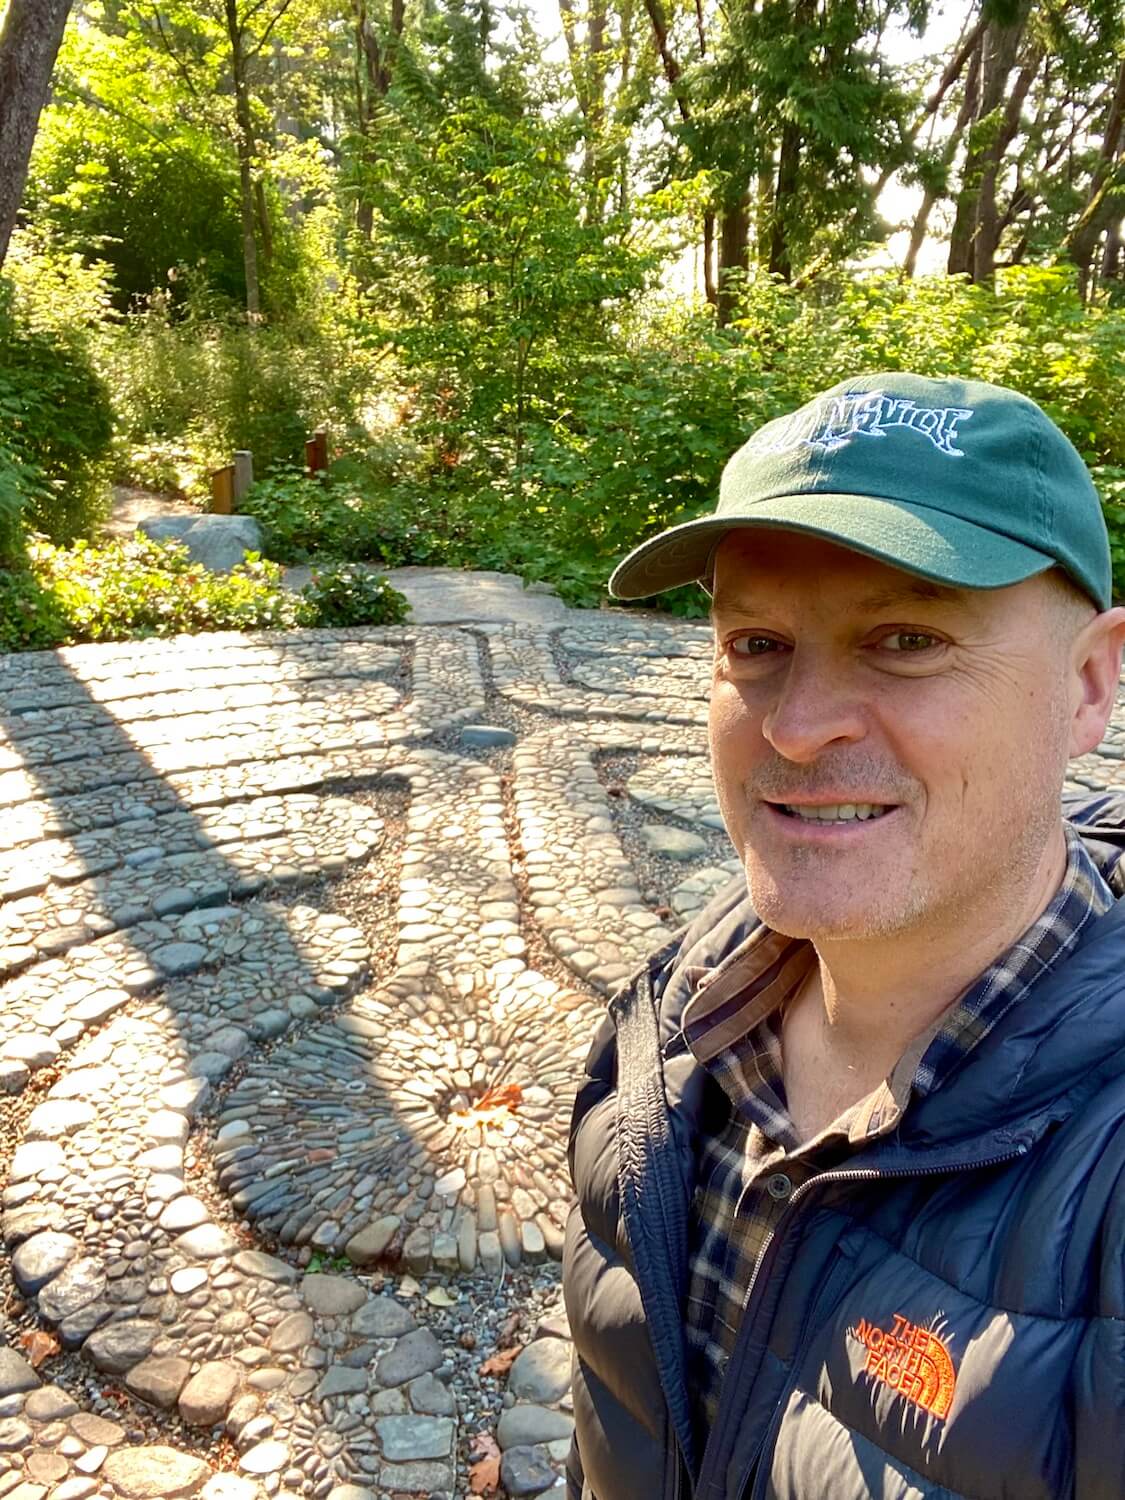 Matthew Kessi poses for a selfie at a Labyrinth on Bainbridge Island. There is thick green forest behind him.